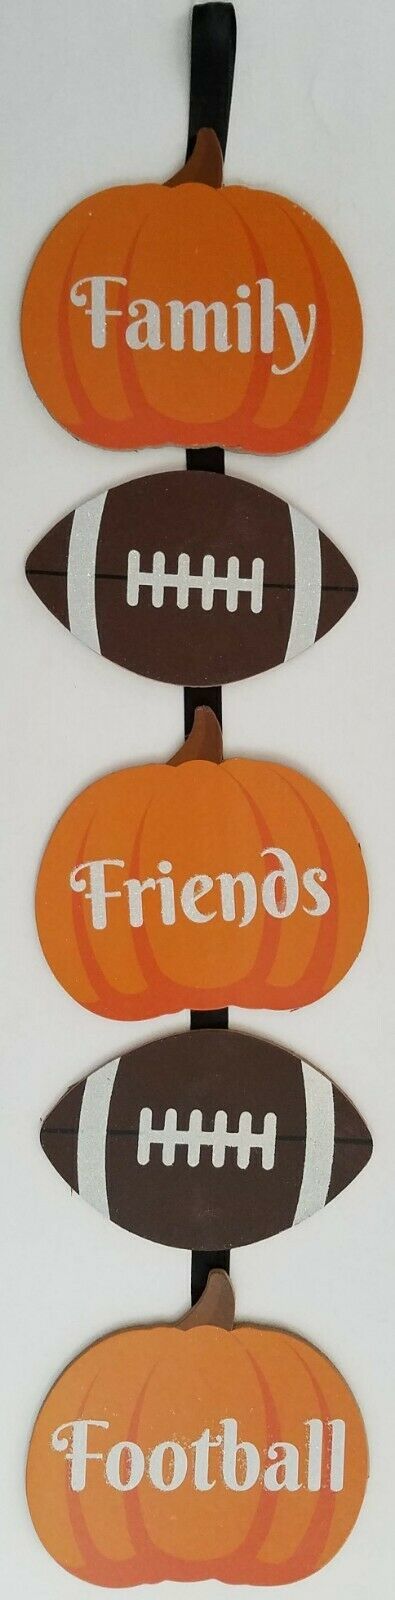 Primary image for Autumn Thanksgiving Wall Décor Footballs & Pumpkins Boards 25”H x 5.5”W